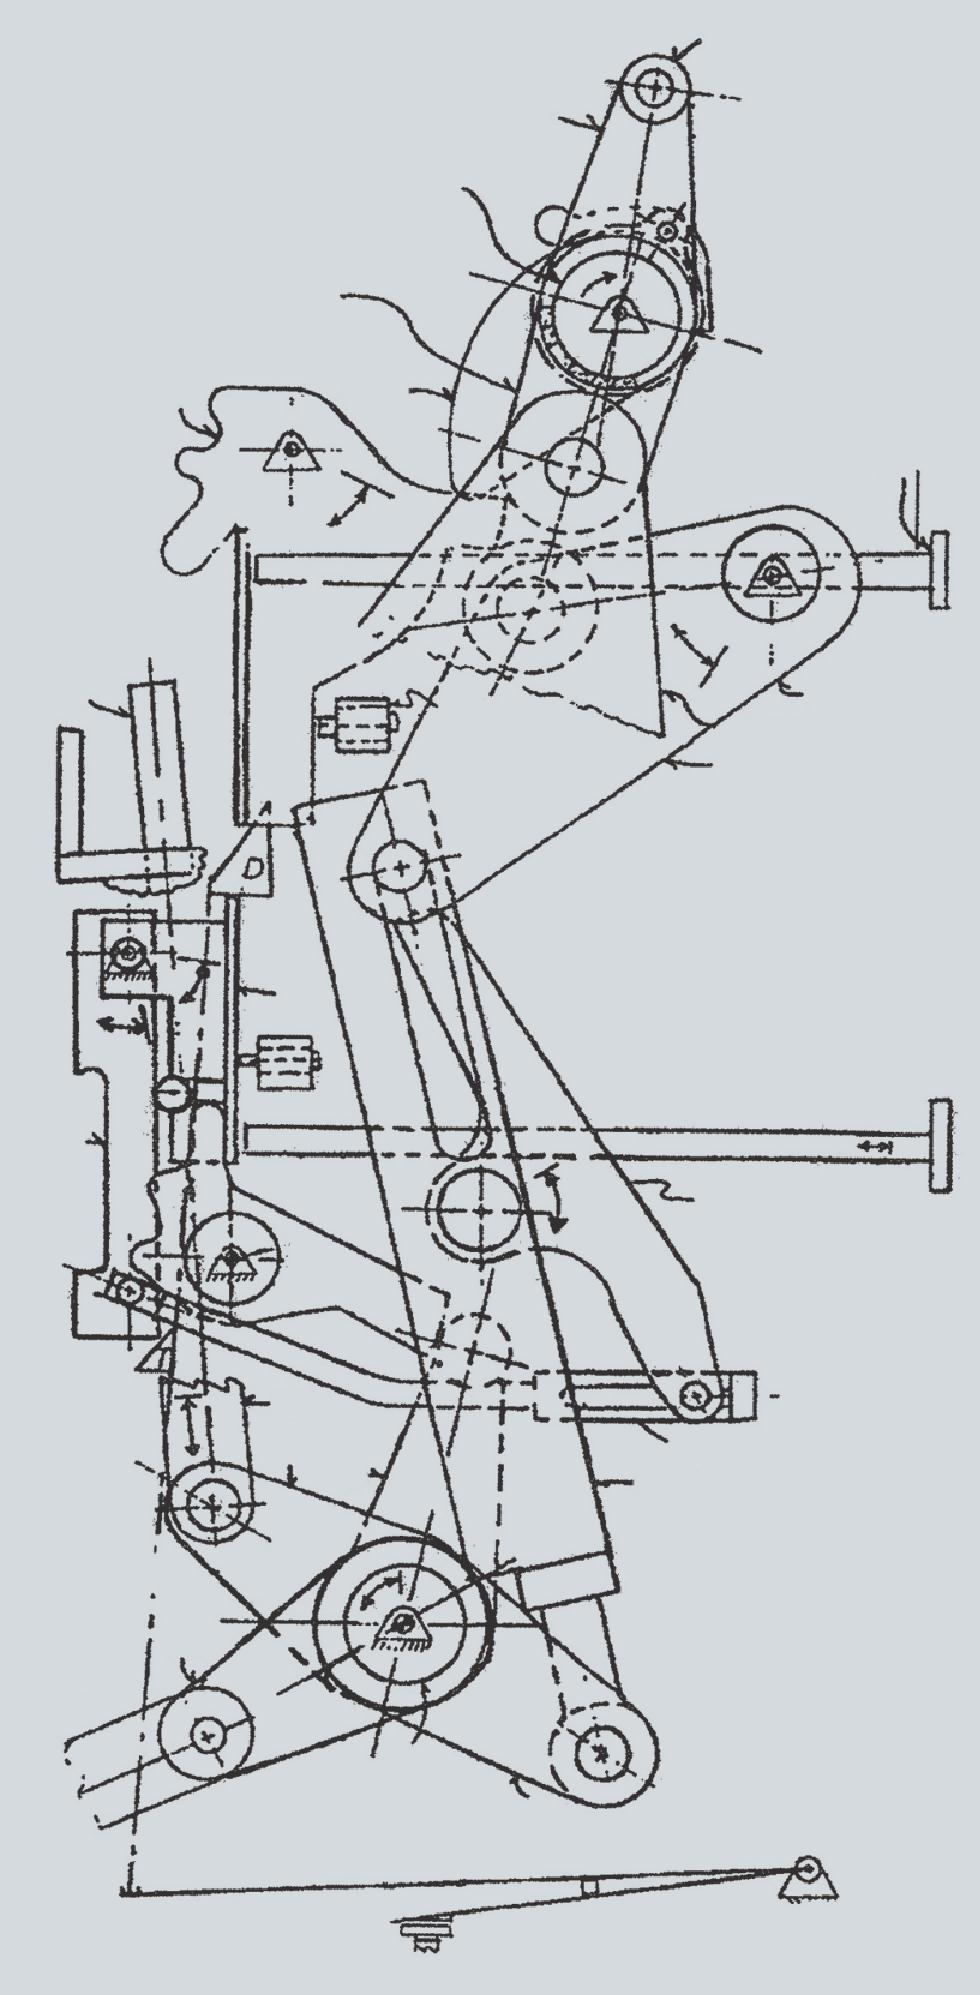 Vacuum interrupter/ operator Figure 19: Operating mechanism section diagram (drawout trip-free linkage shown) mechanism CLOSED, closing spring DISCHARGED 62.5.2 62.5 62.1 62.2 62.3 62.5.1 53.0 62.5.2 - Close latch-pawl 62.